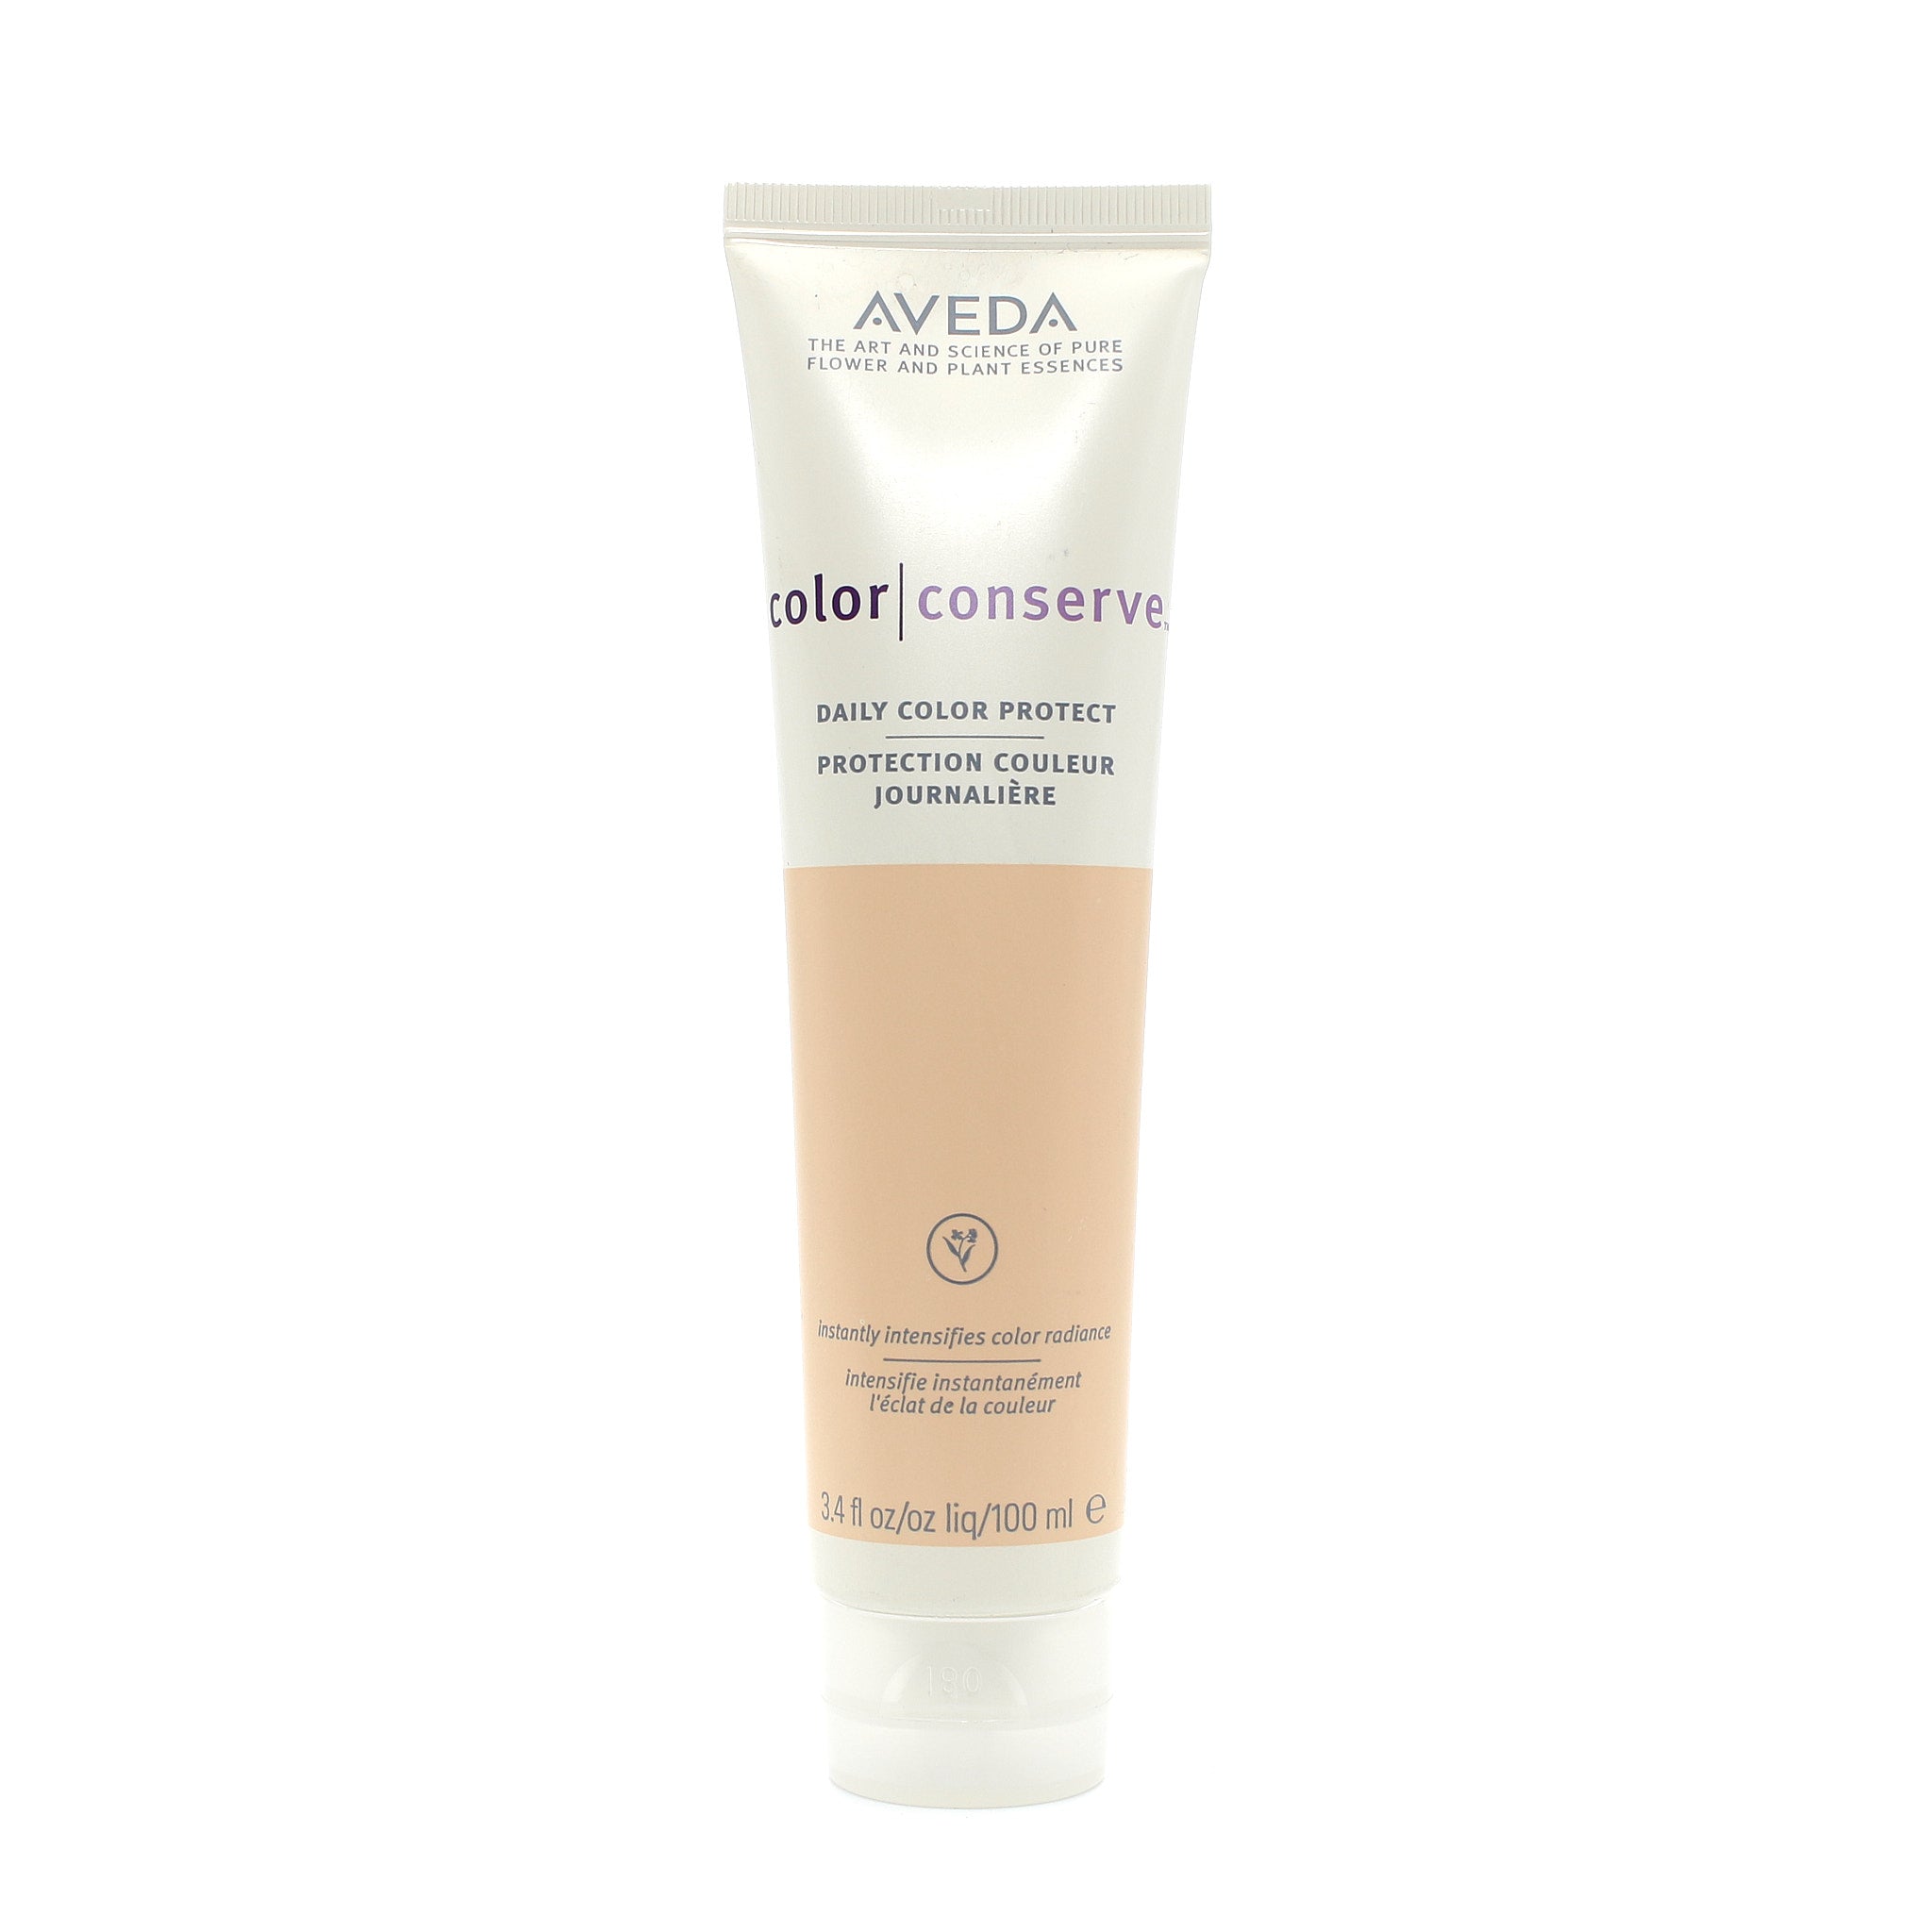 AVEDA Color Conserve Daily Color Protect 3.4 oz